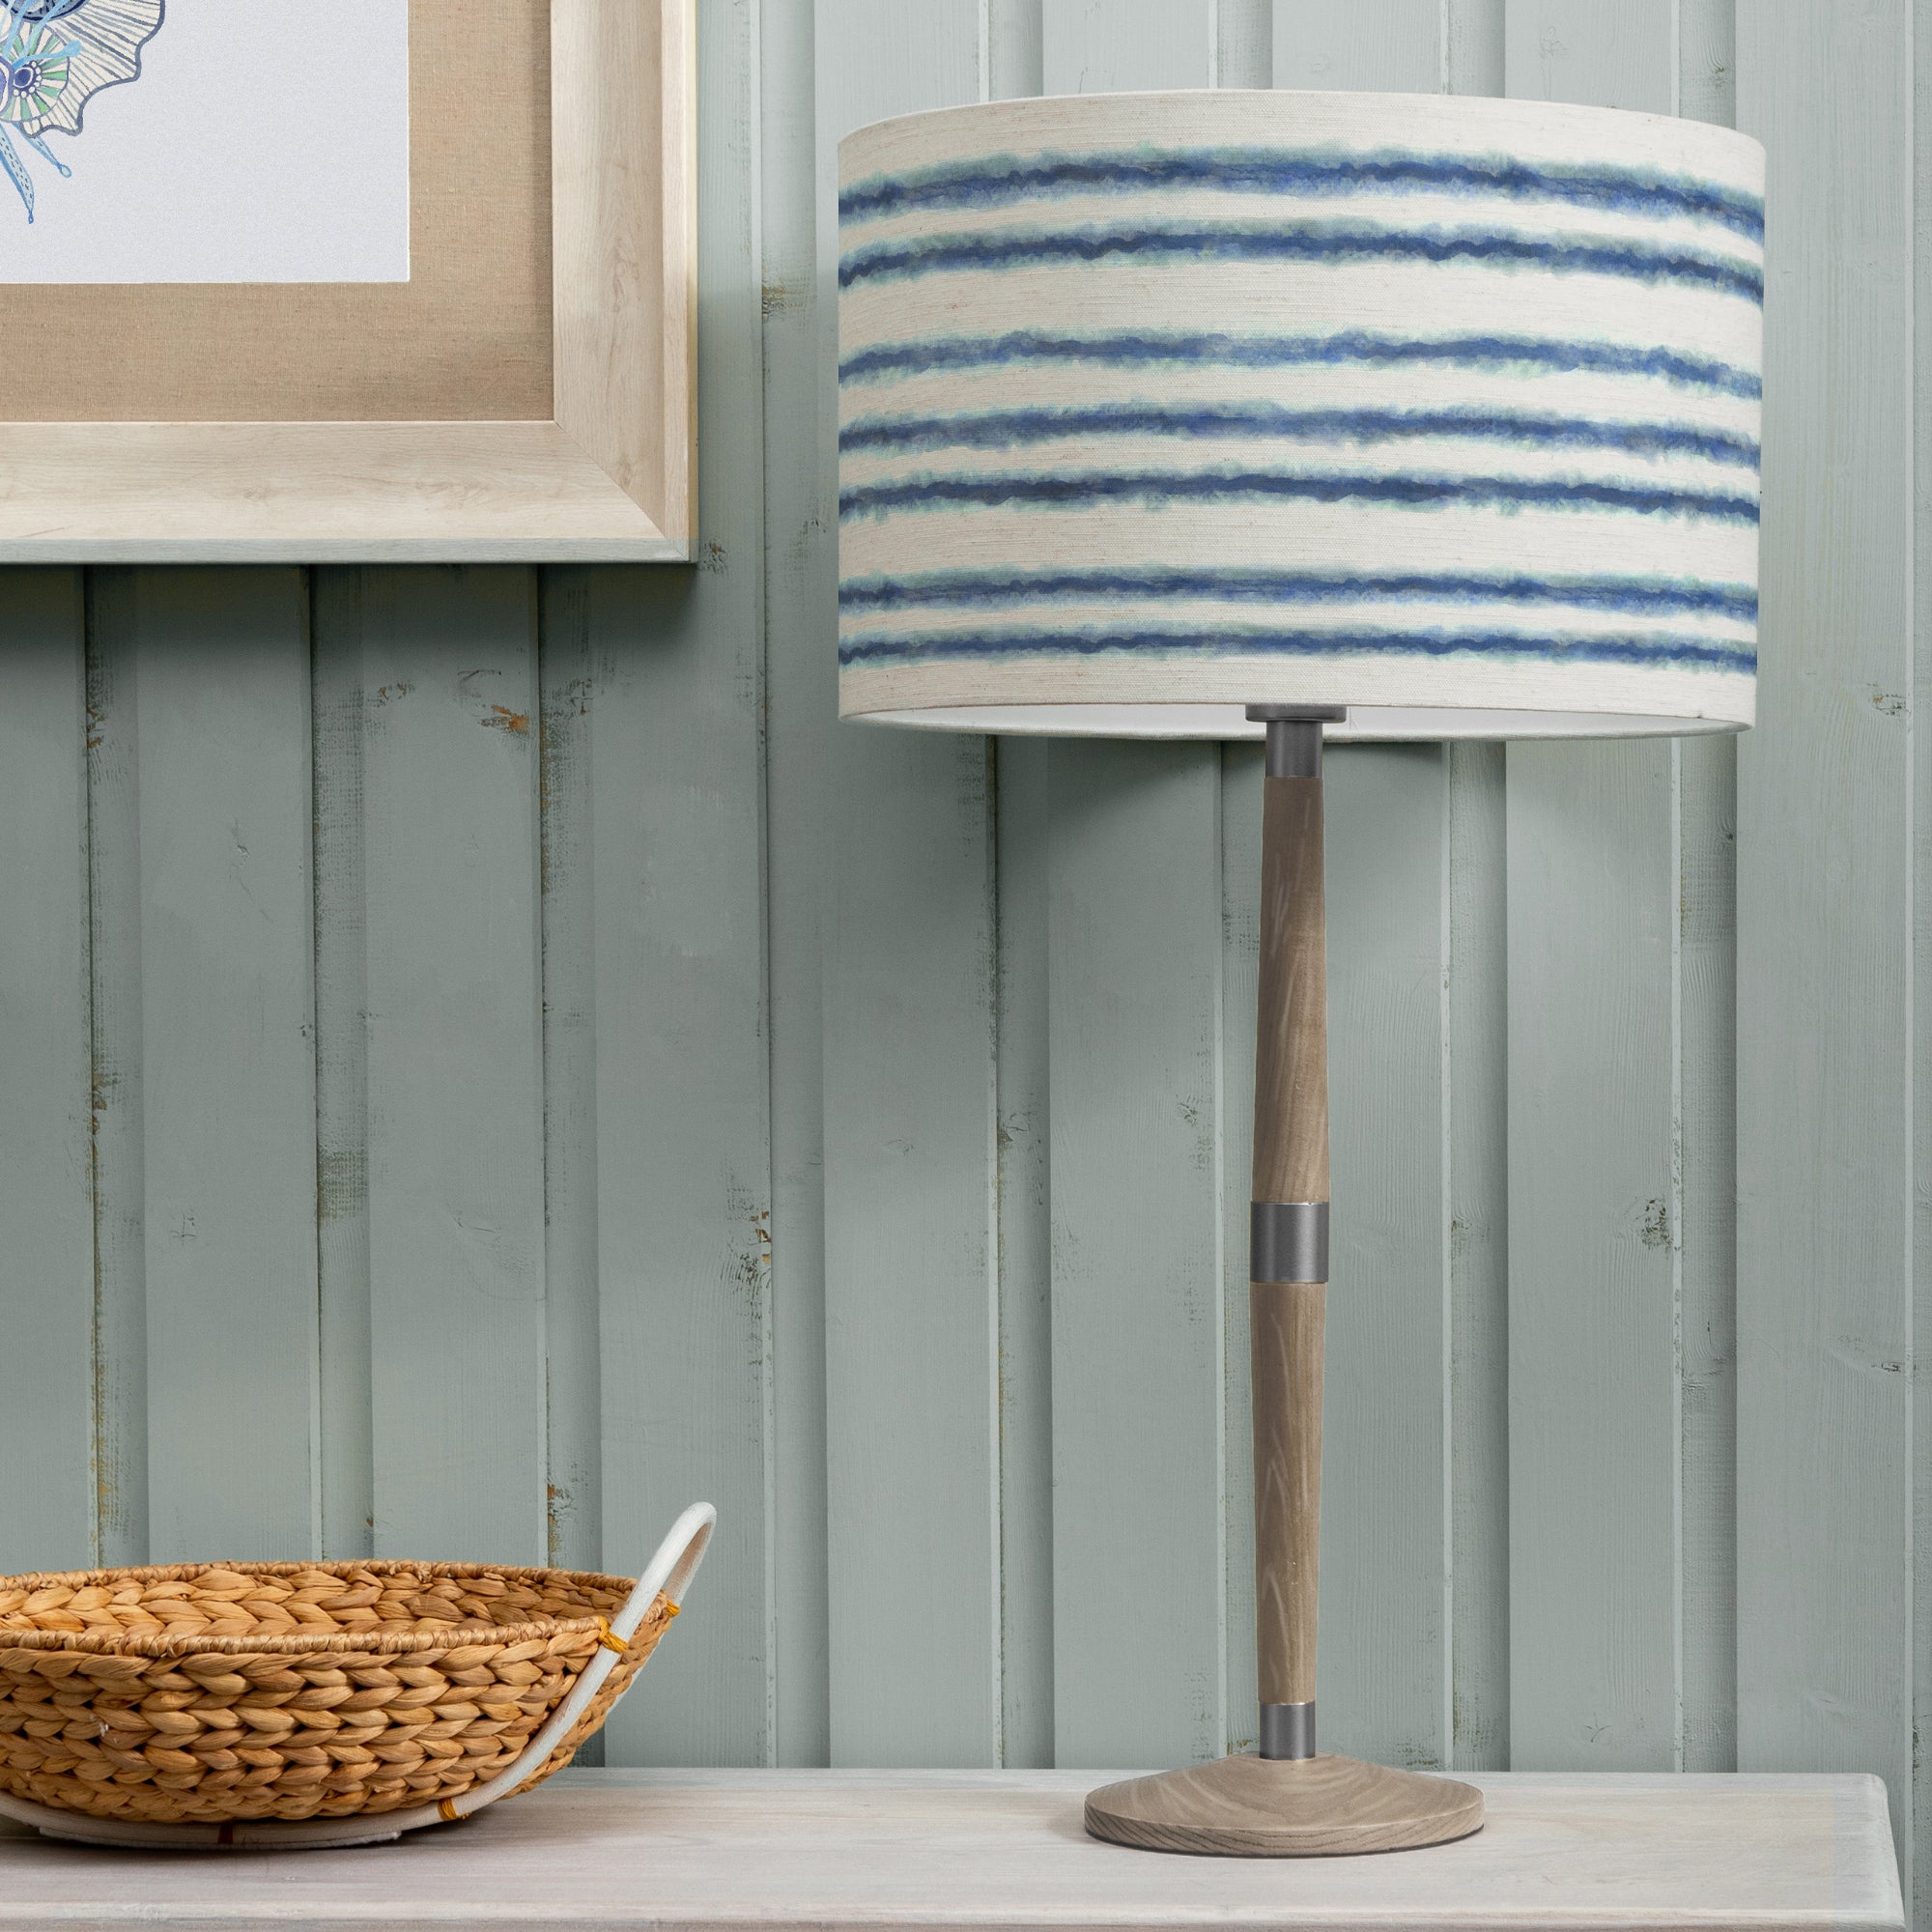 Solensis Large Table Lamp with Merella Shade Cobalt Blue